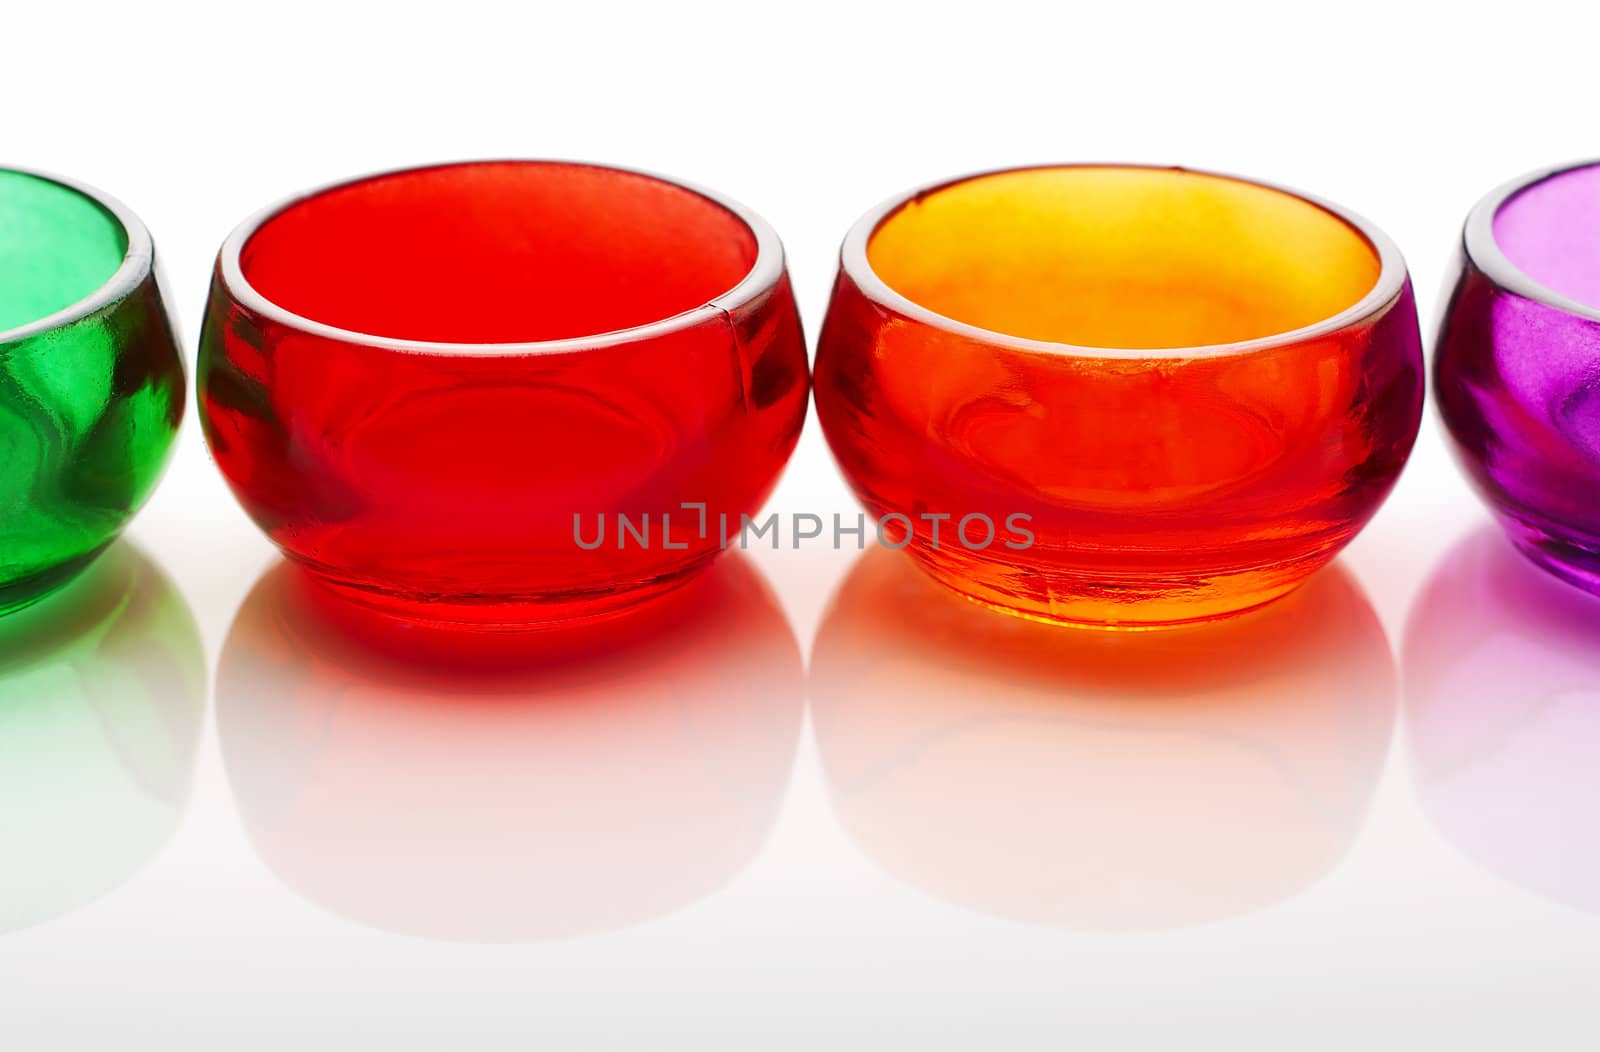 Four colored cups on white reflective background